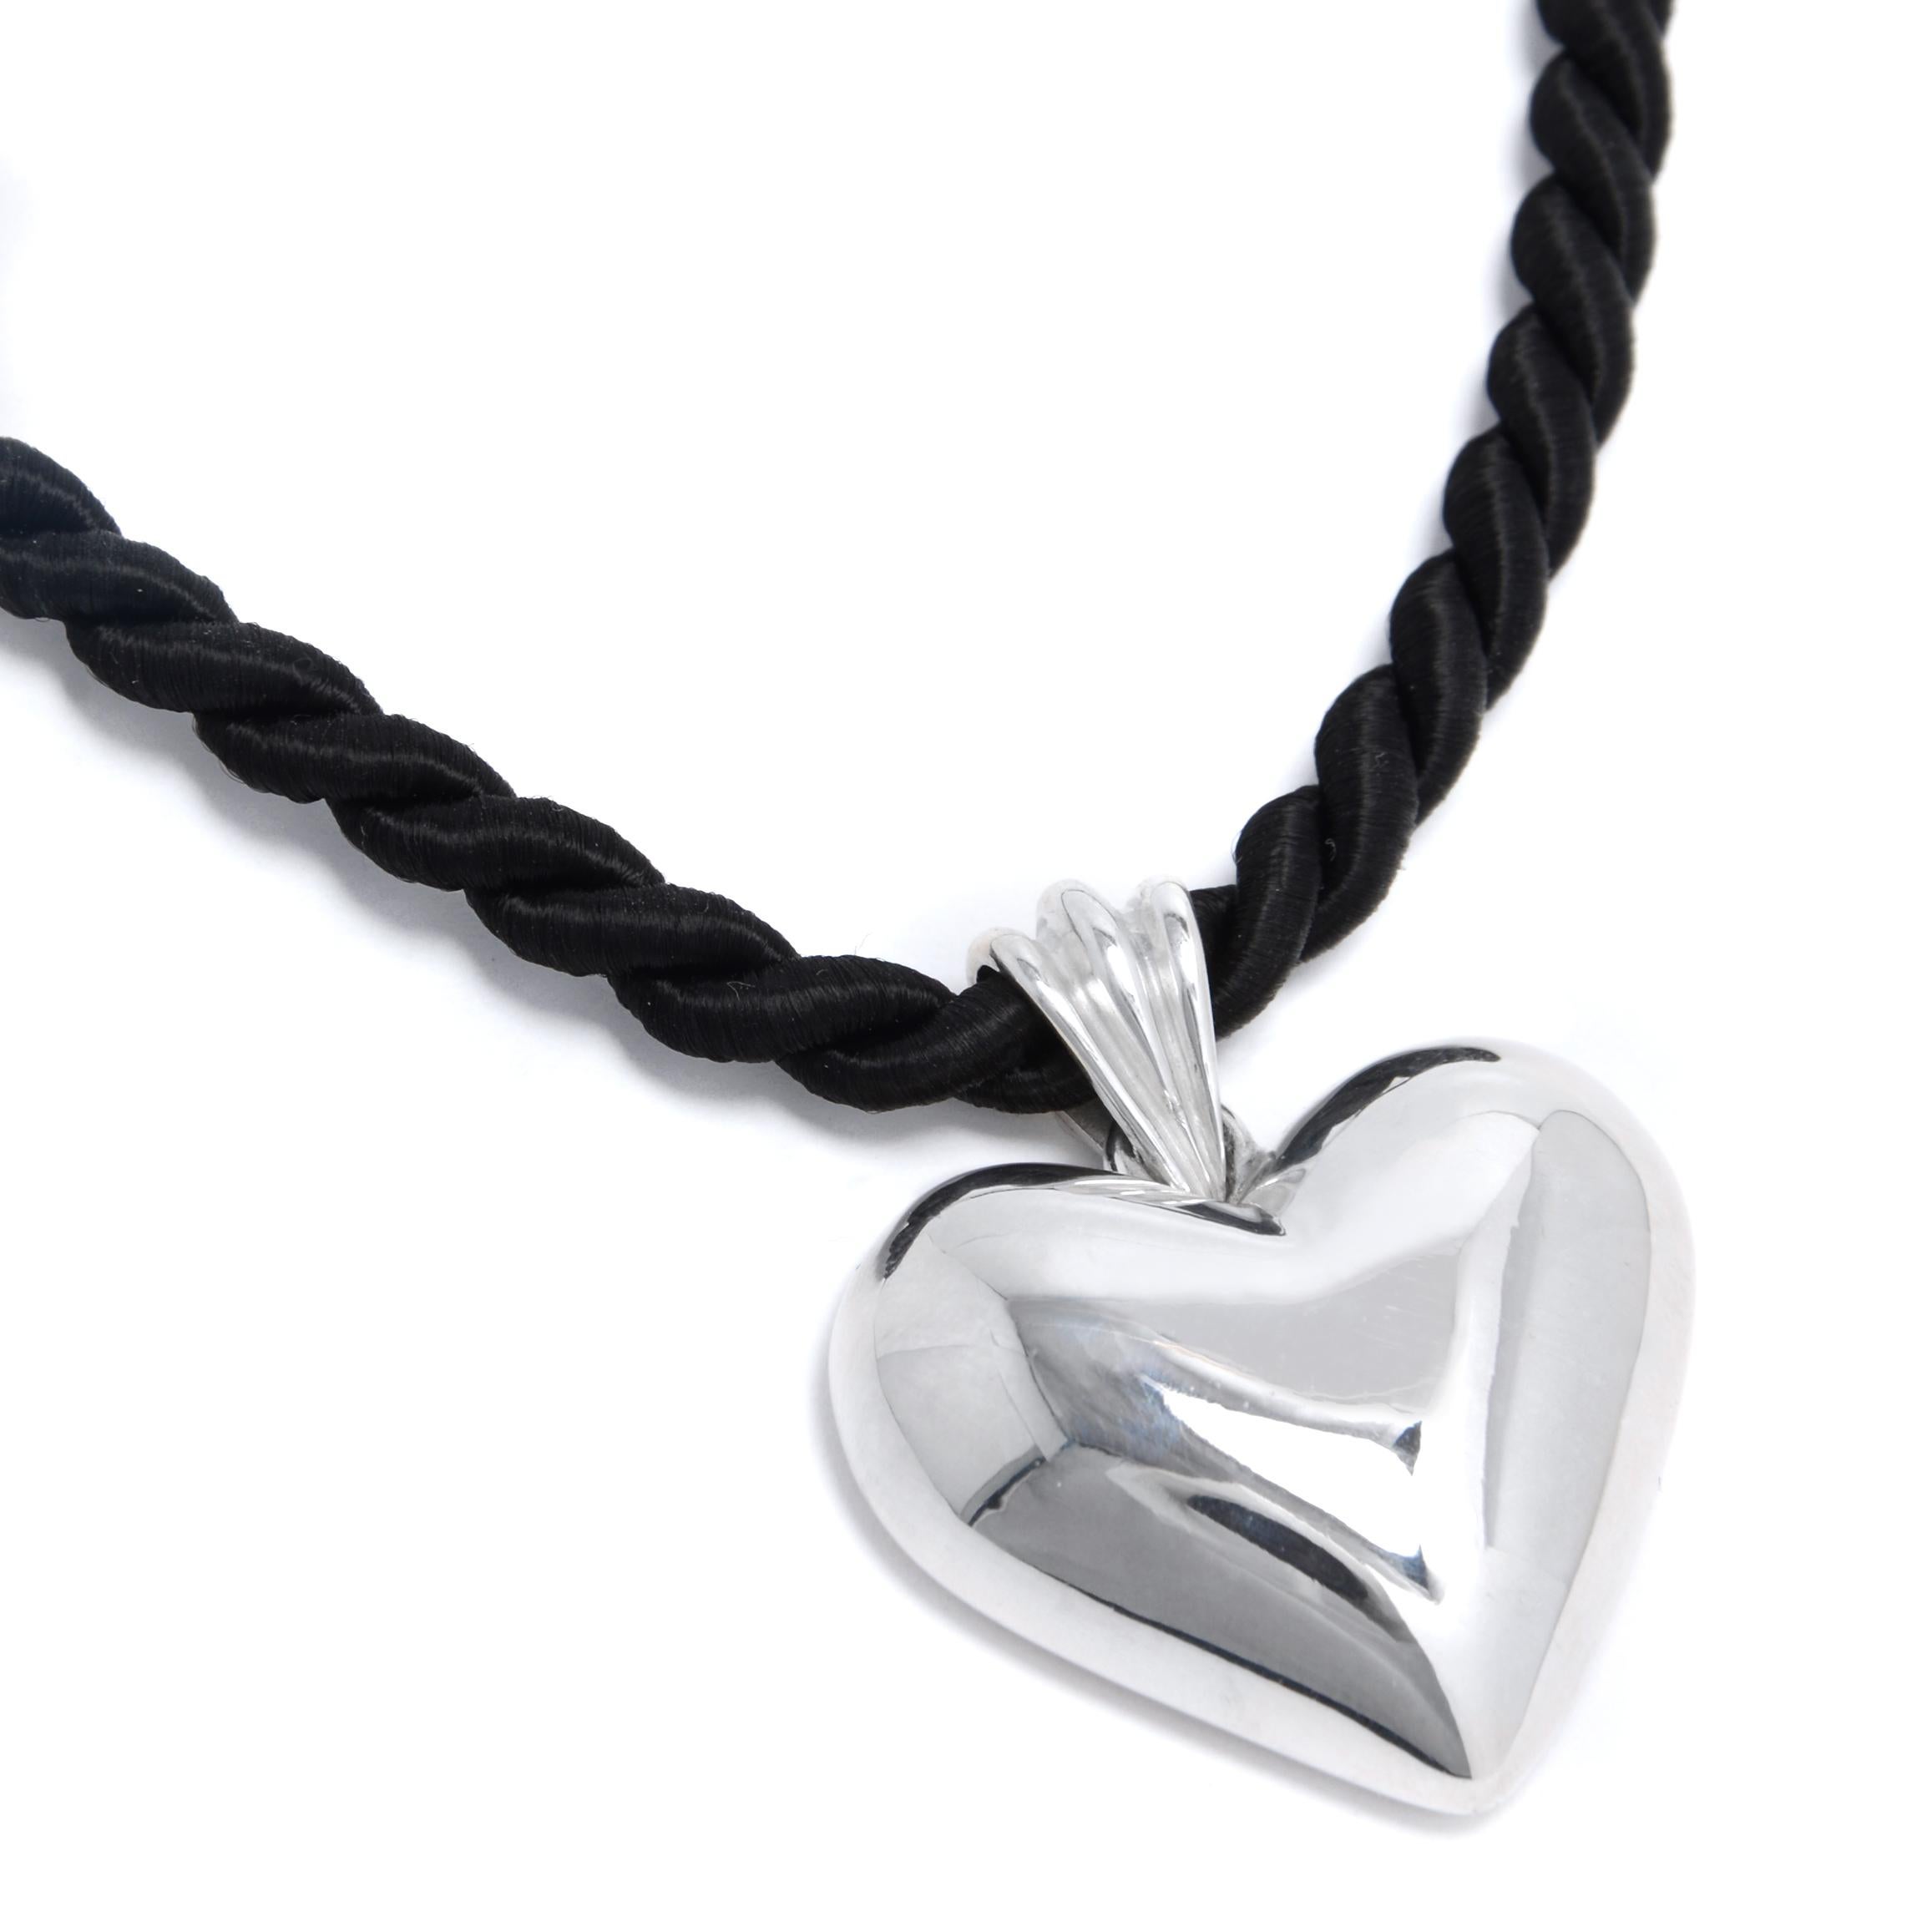 The Heavy Heart Pendant is crafted from heirloom-quality silver and hung on a twisted cotton cord. A piece that feels trend-forward, but is made to last forever. 

Lays flat on the neck
Adjustable between 16-18' inches
Lobster clasp closure 

Each